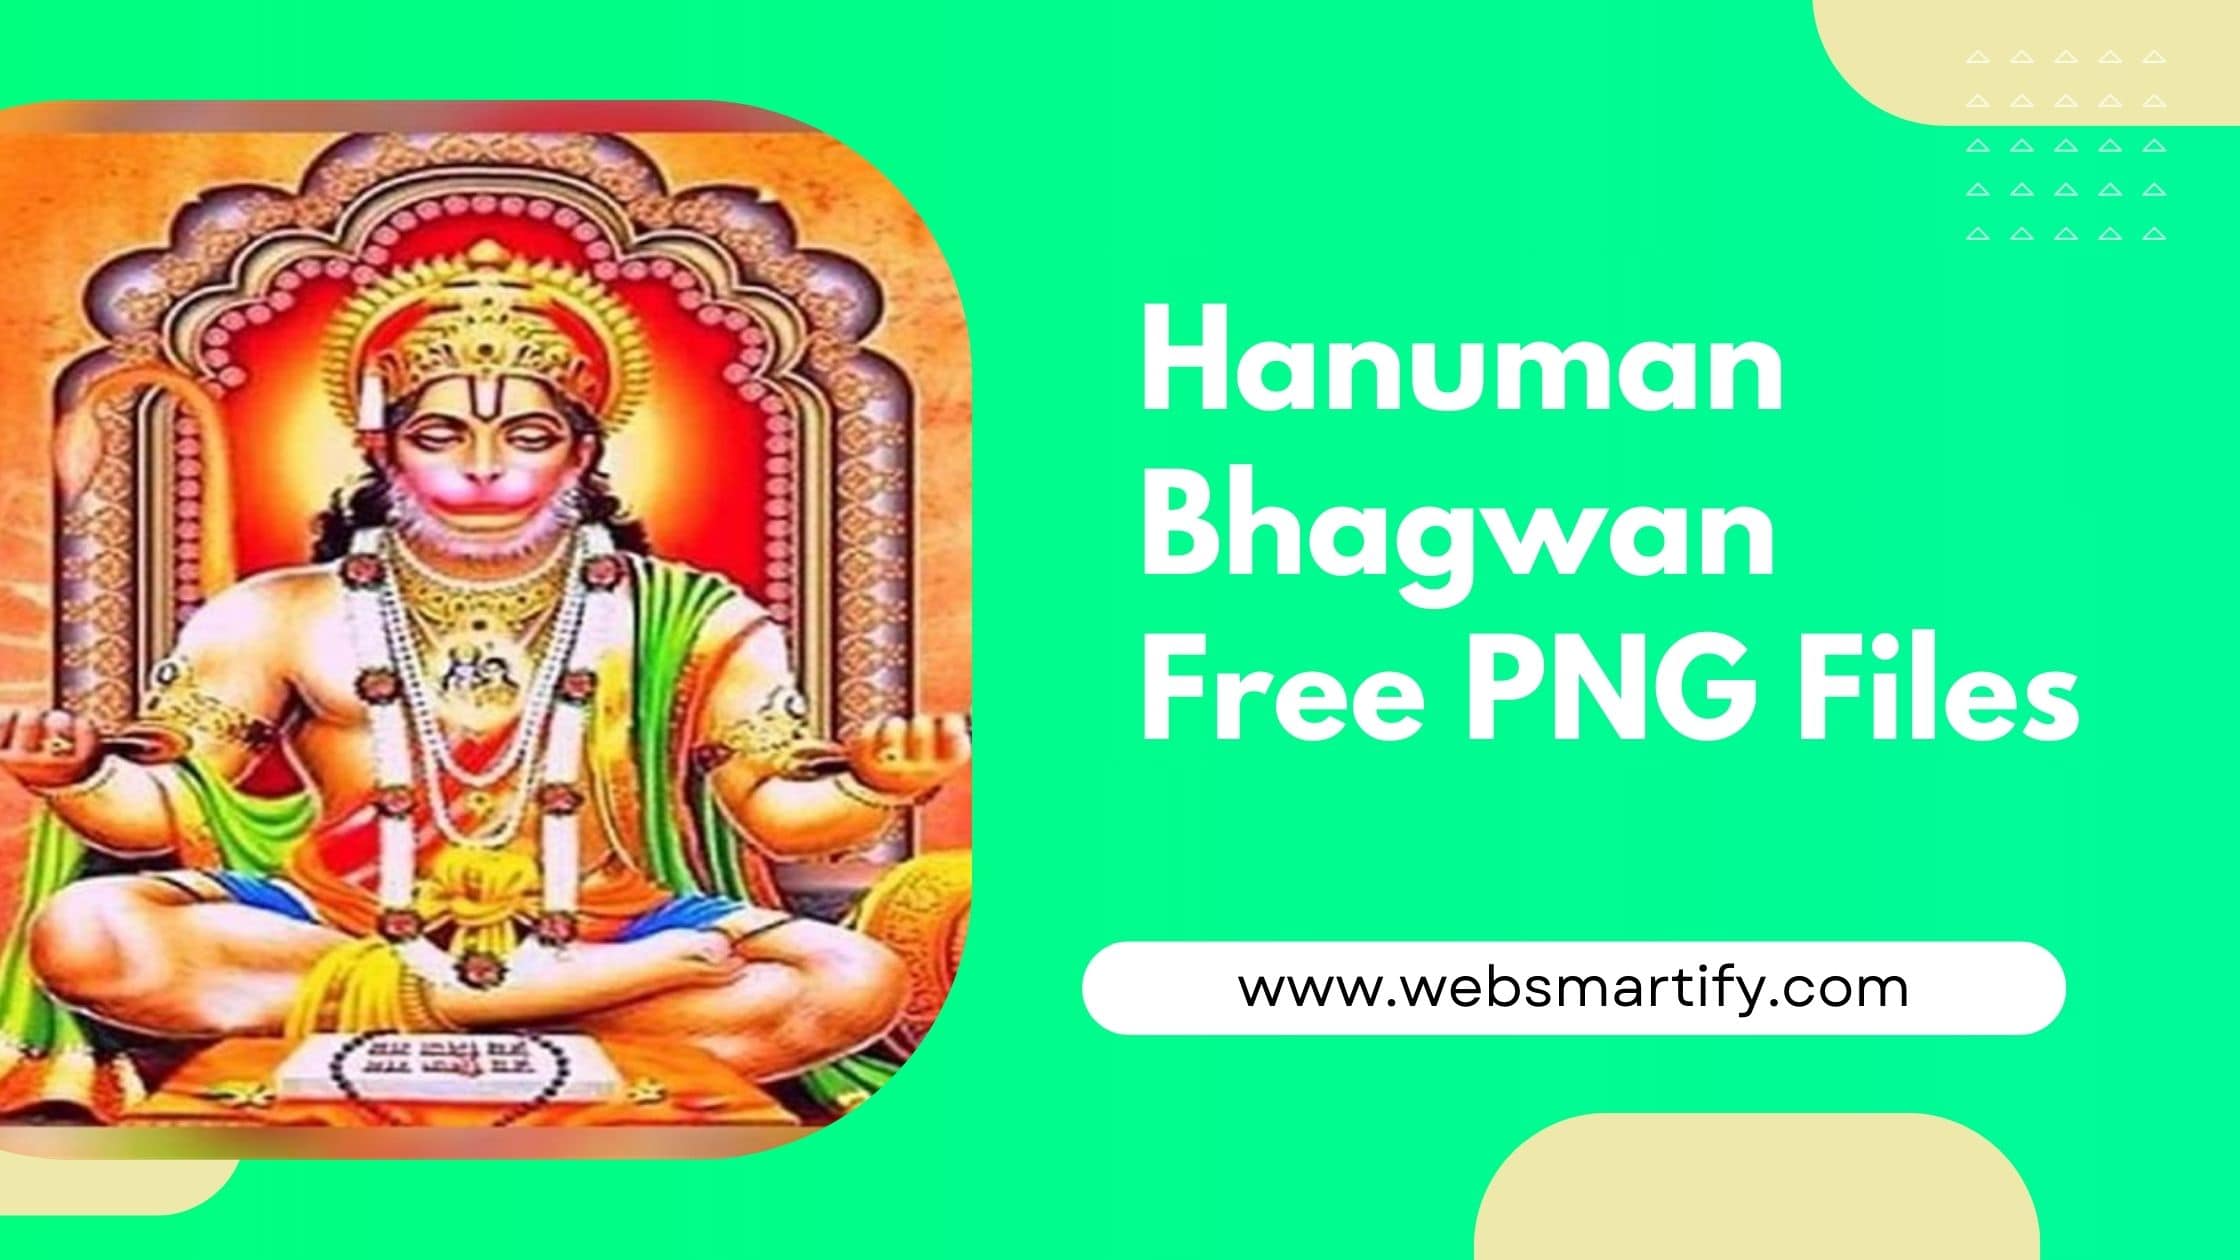 Discover the best Hanuman Bhagwan Free PNG files for your designs. High-quality, transparent backgrounds for various projects. - Websmartify